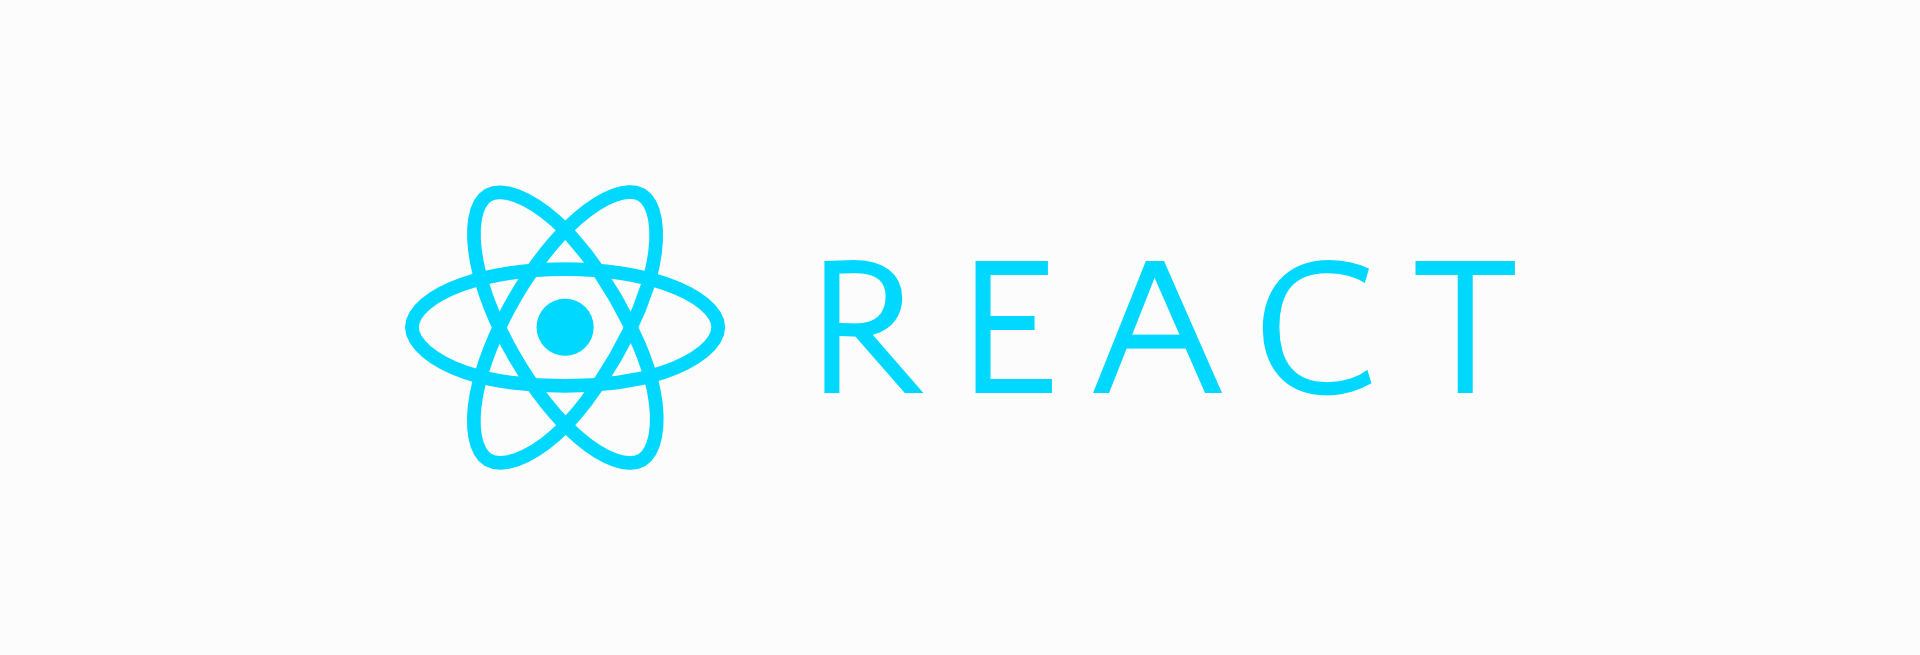 small react projects